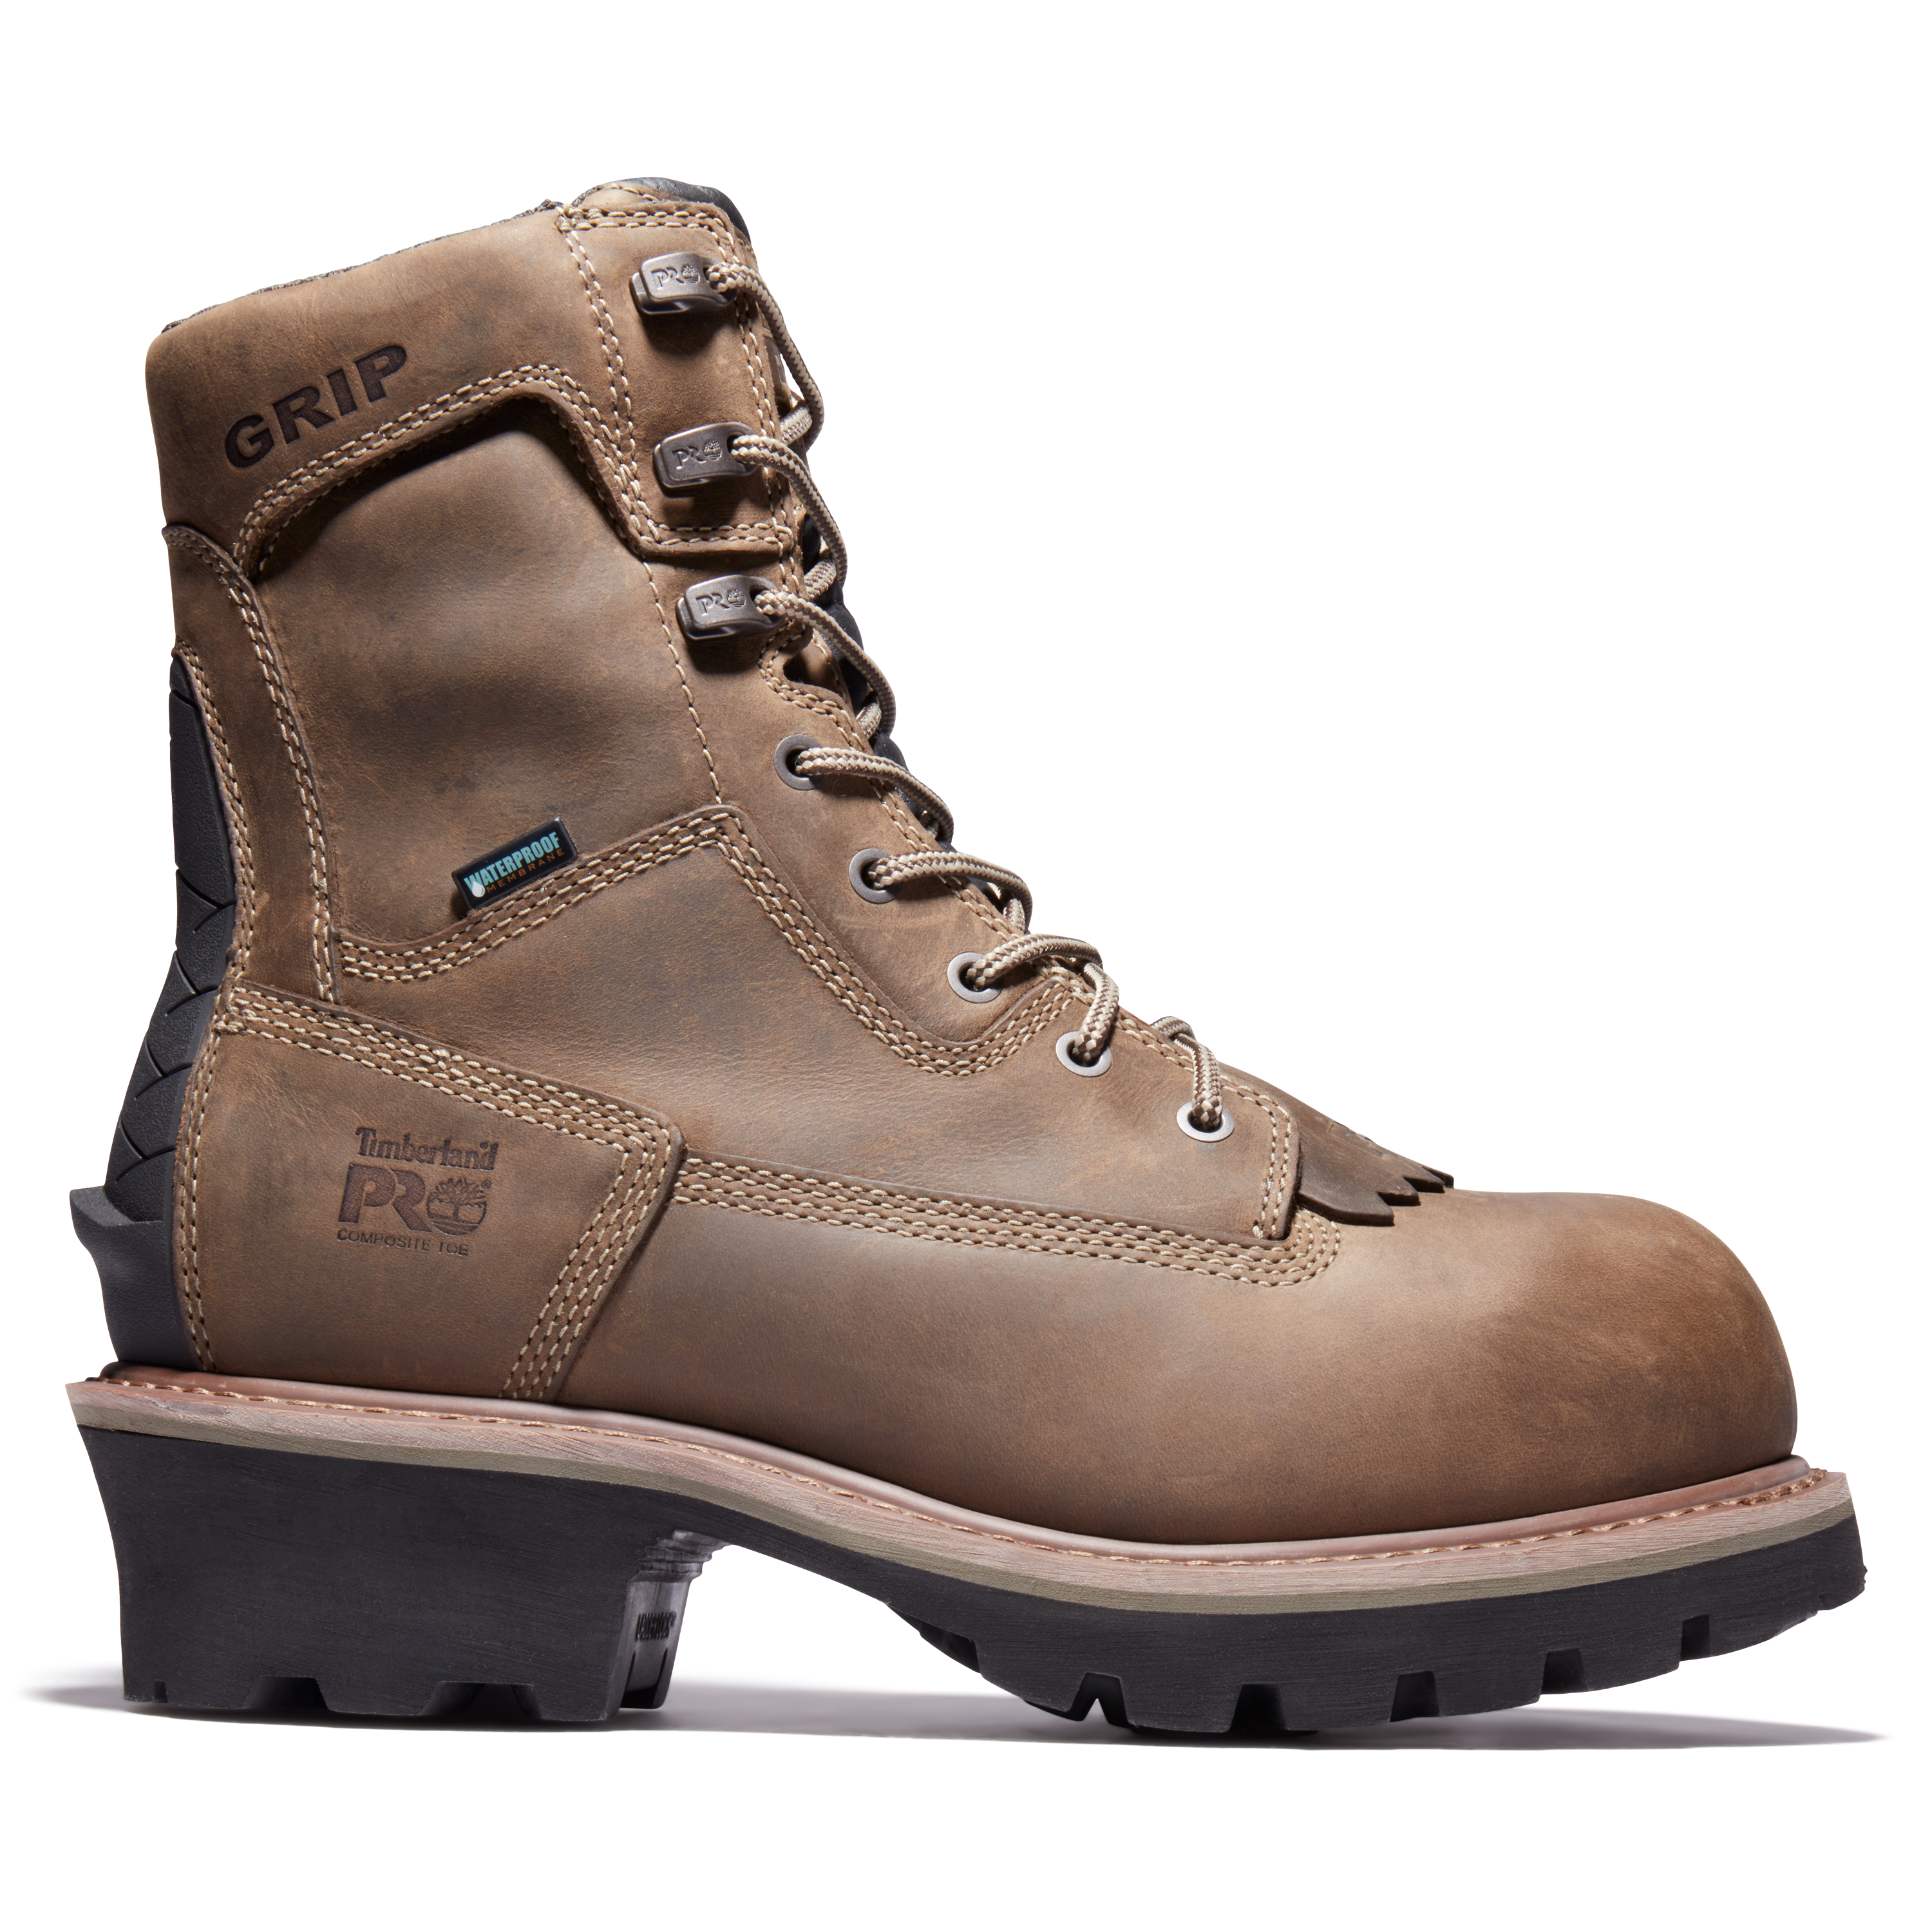 Timberland Pro Evergreen Logger Composite Toe Insulated / Waterproof - Wide - Mens